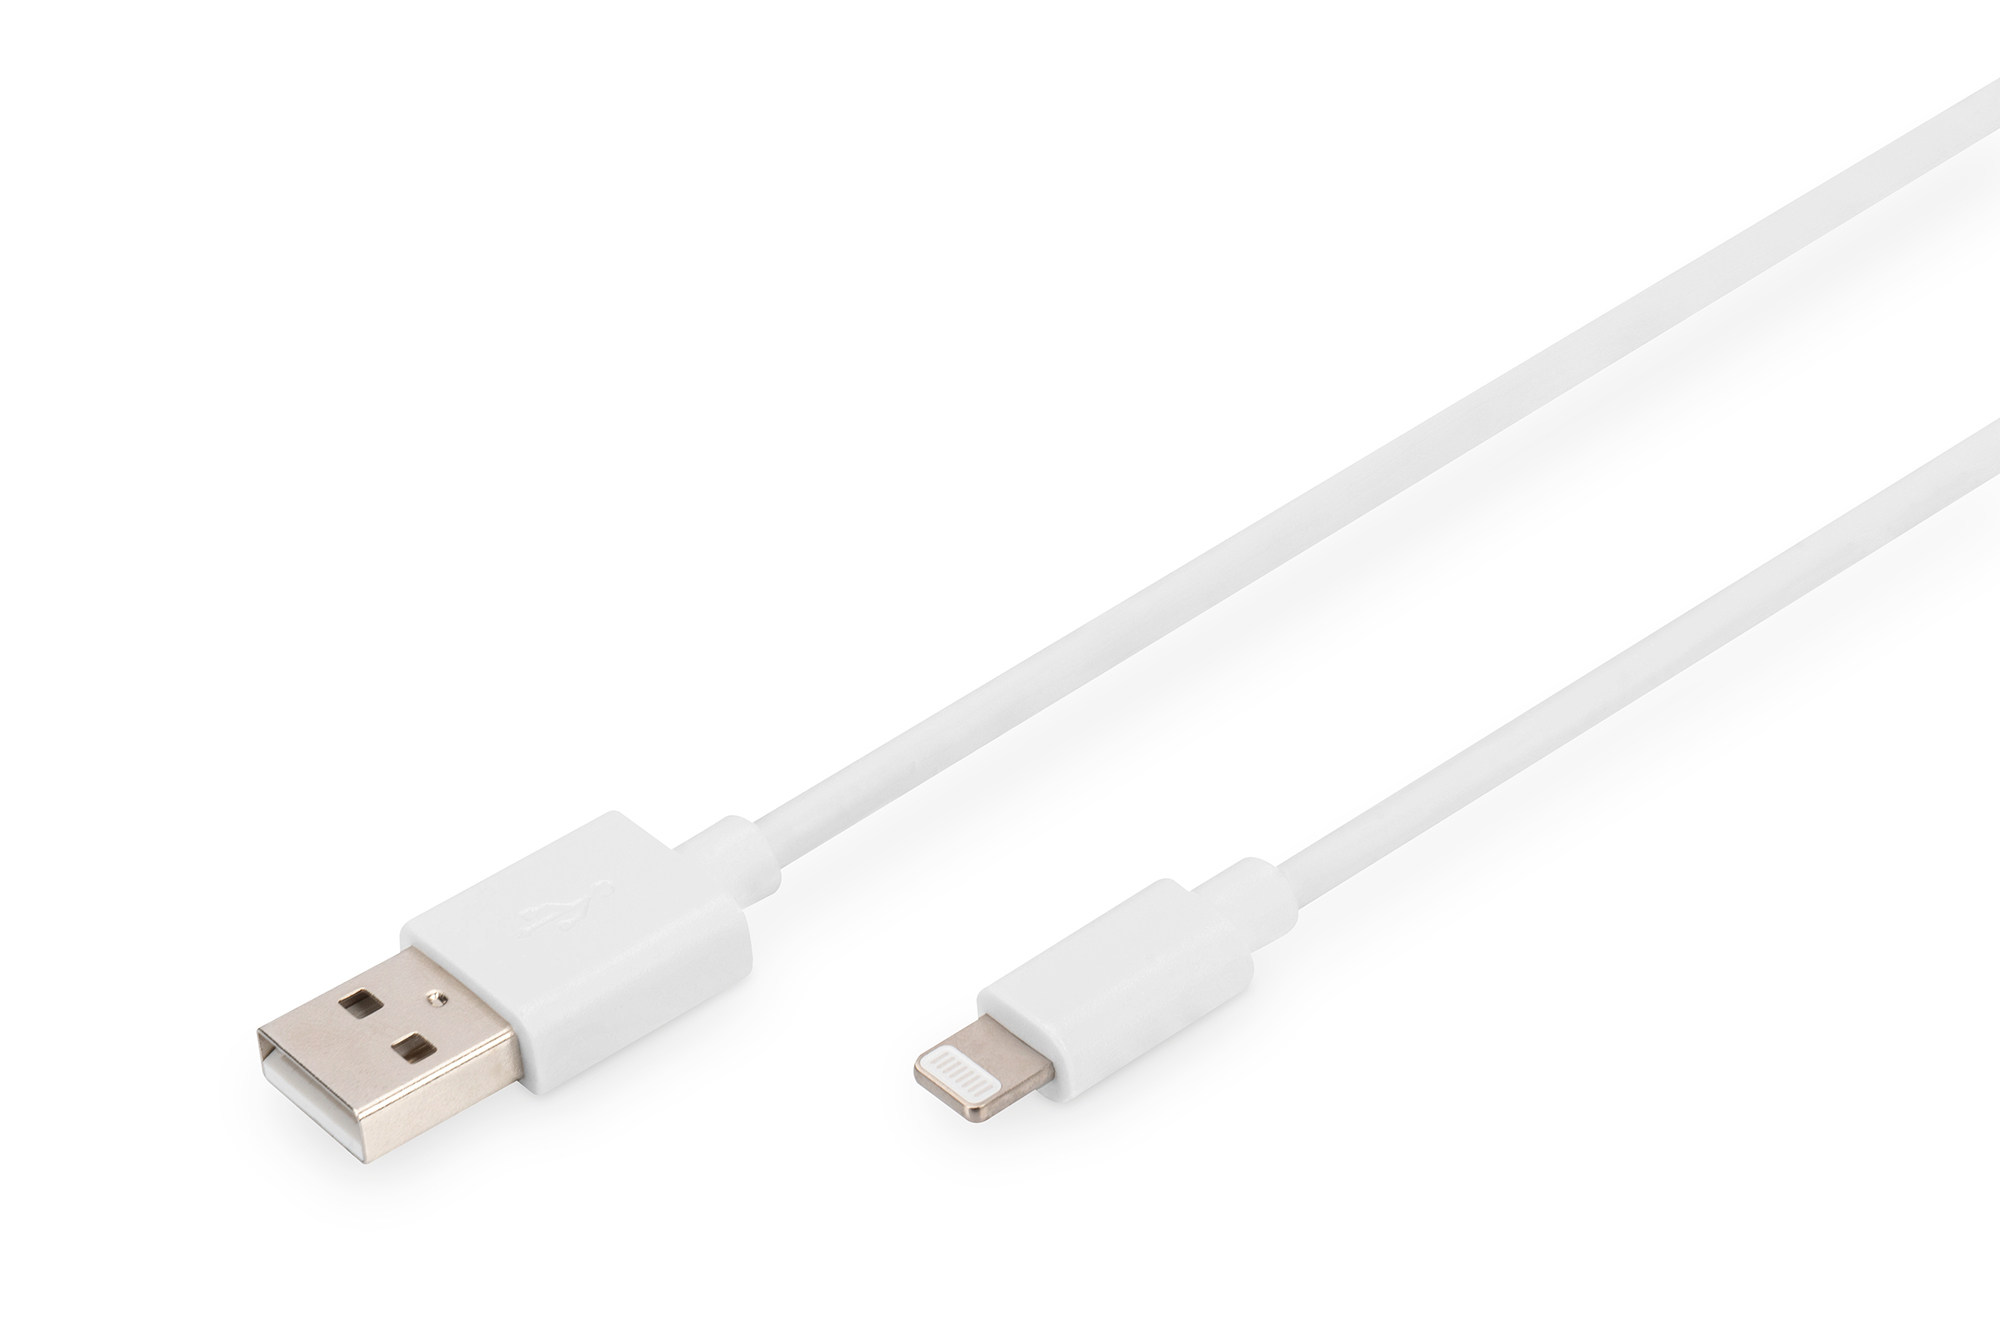 Digitus Lightning to USB A data/charging cable, MFI-certified